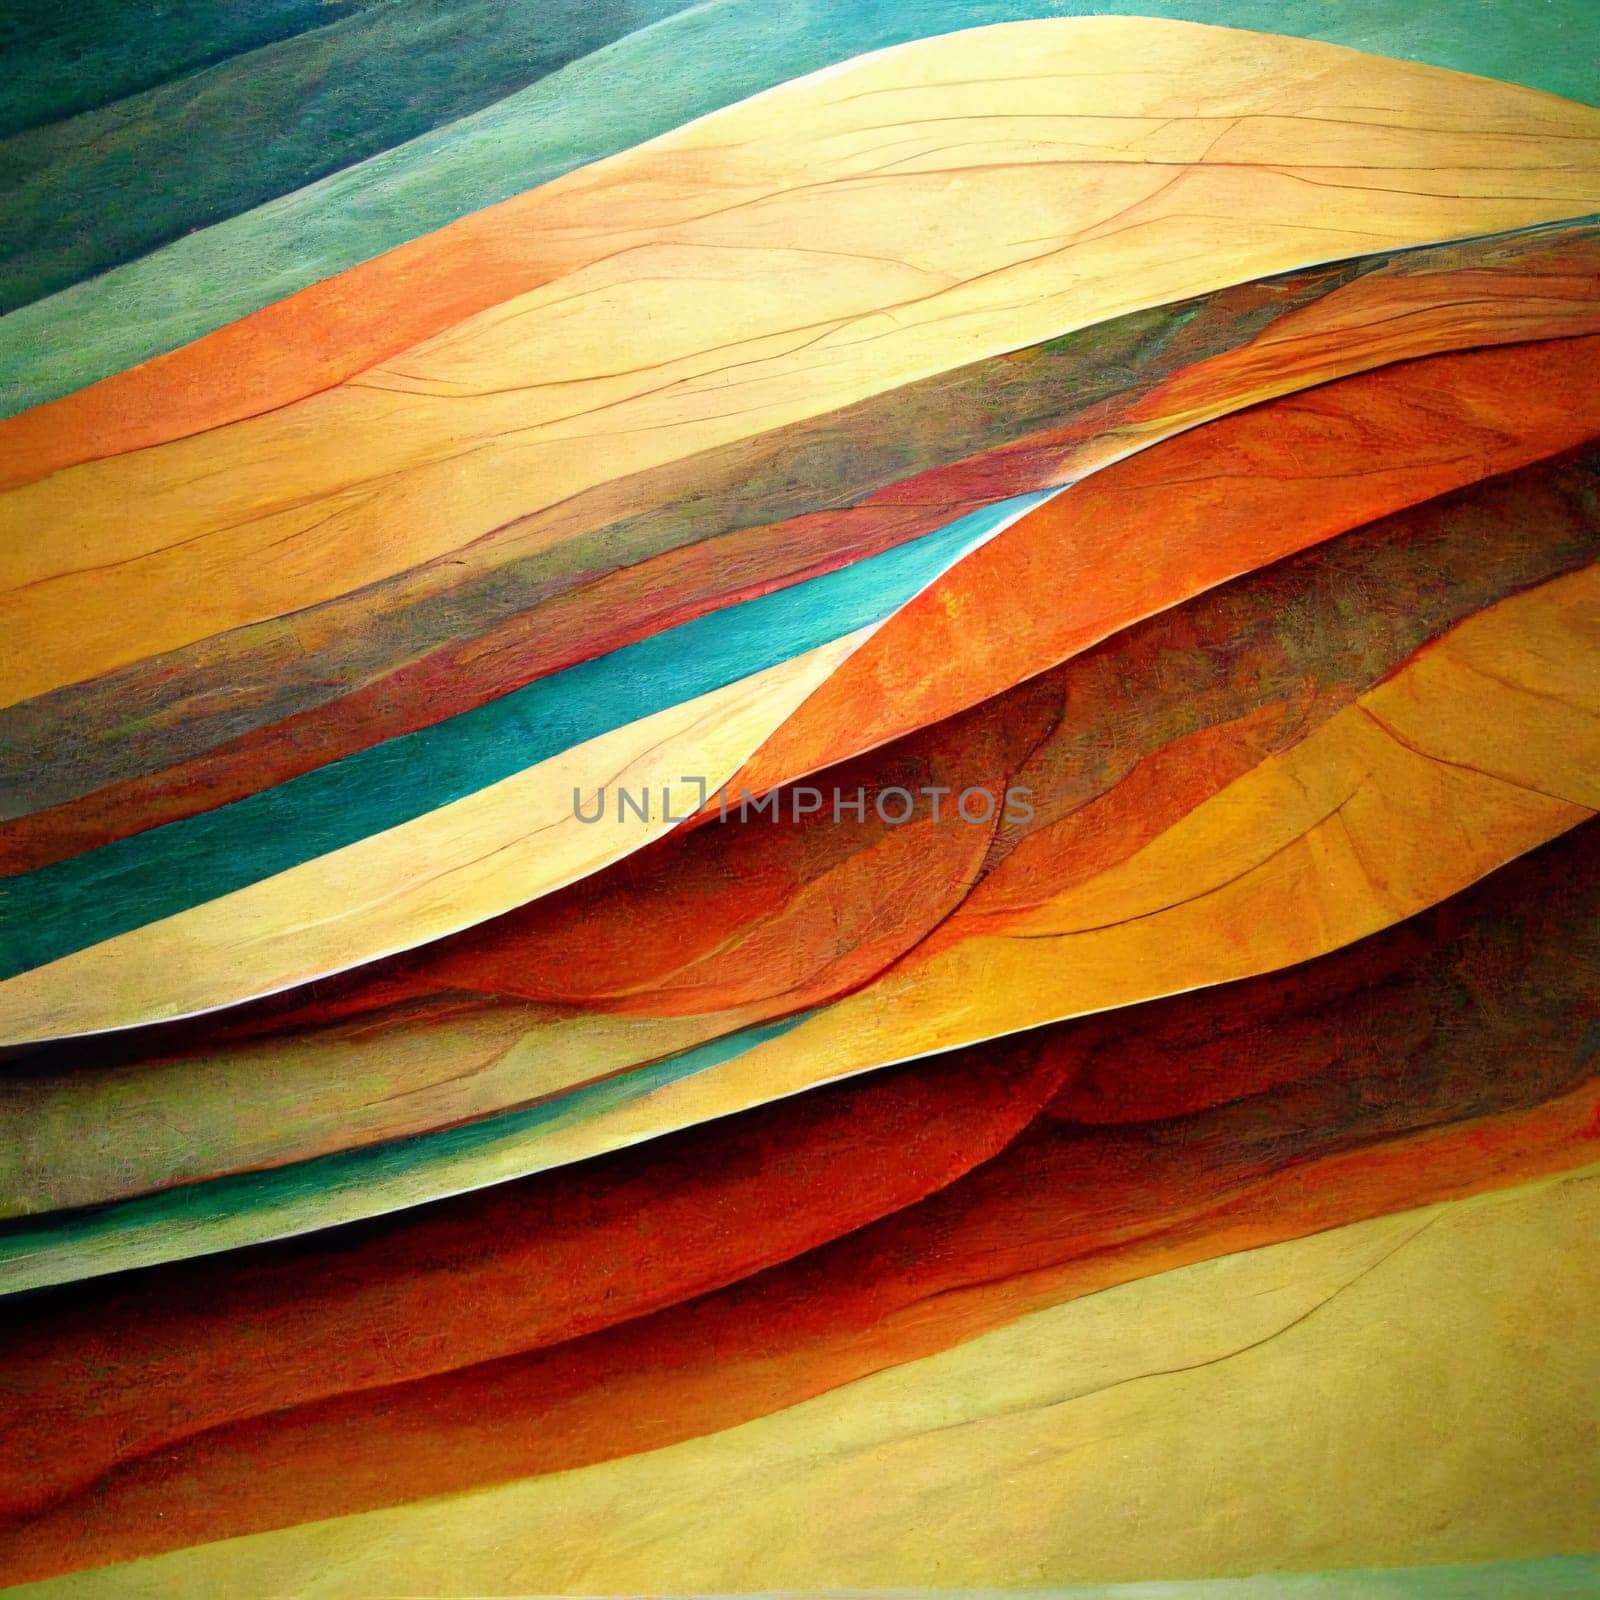 Abstract background design: abstract colorful background made of curved sheets of paper with a gradient